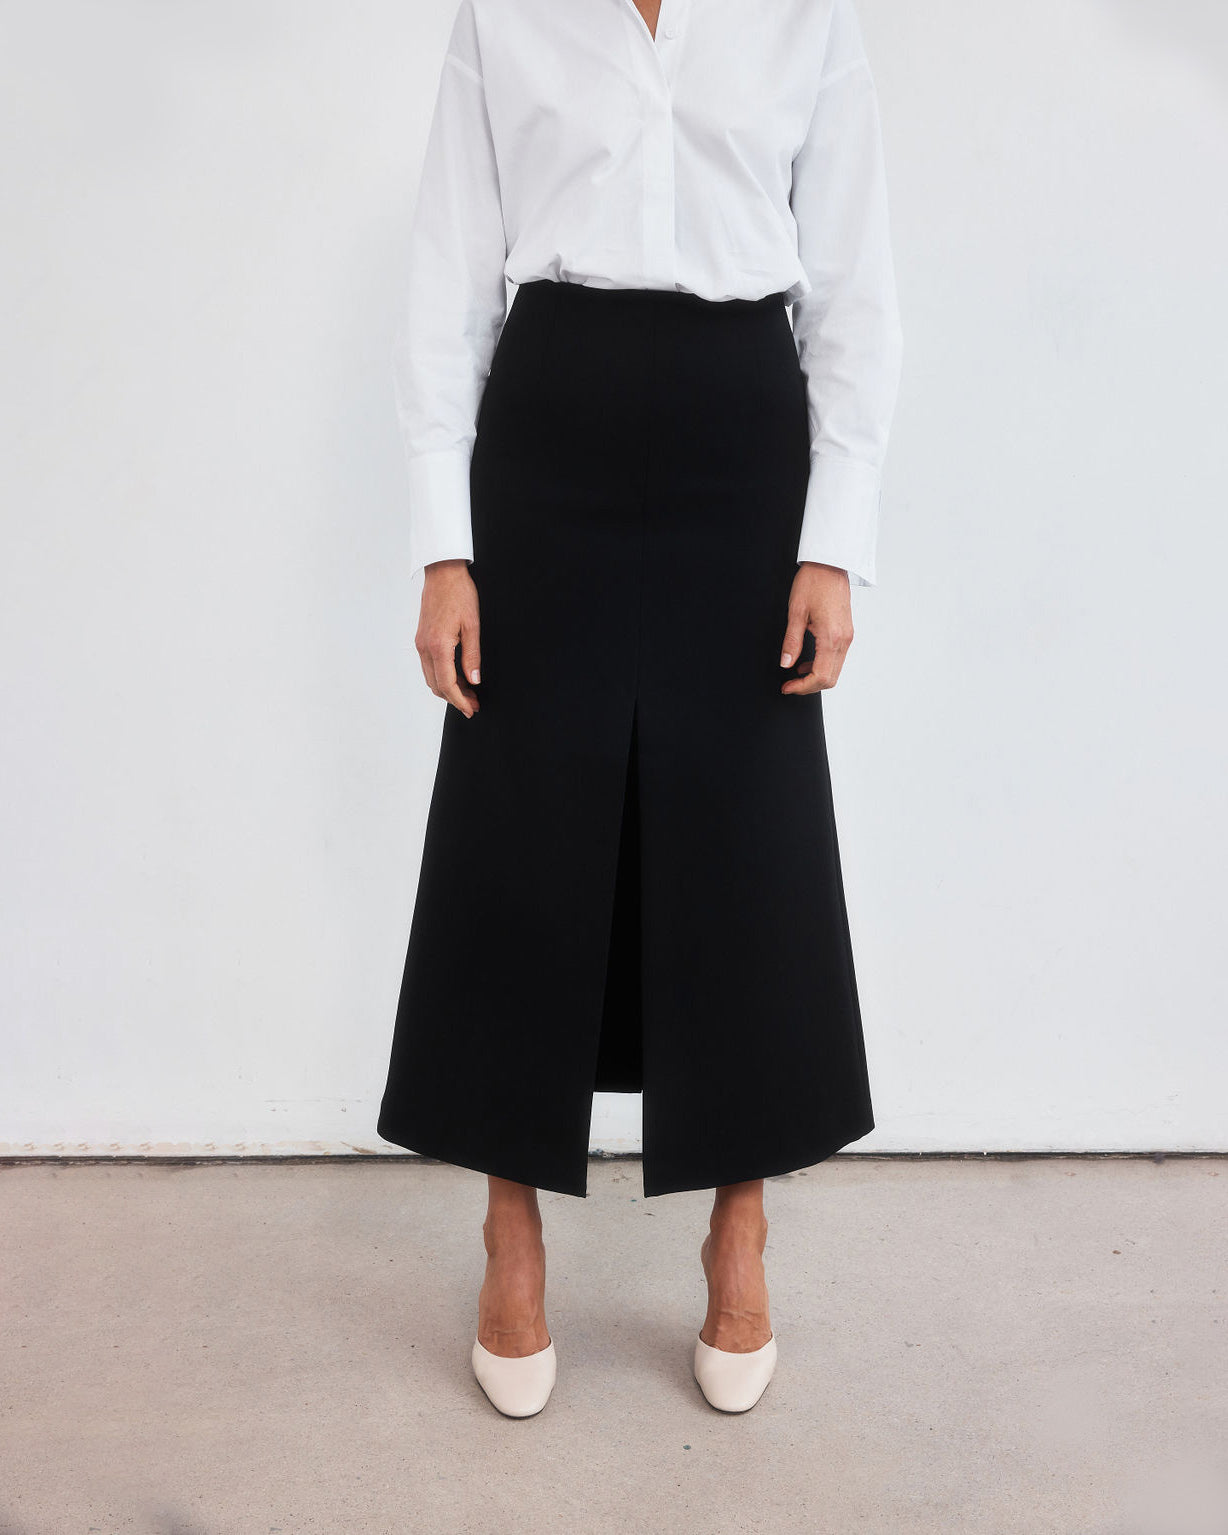 Photograph from chest height down of a woman standing with legs slightly apart staring directly at the camera. Styled wearing a minimalist crisp white shirt, neatly tucked into a high-waisted maxi length skirt with middle split and cream round-toe mules